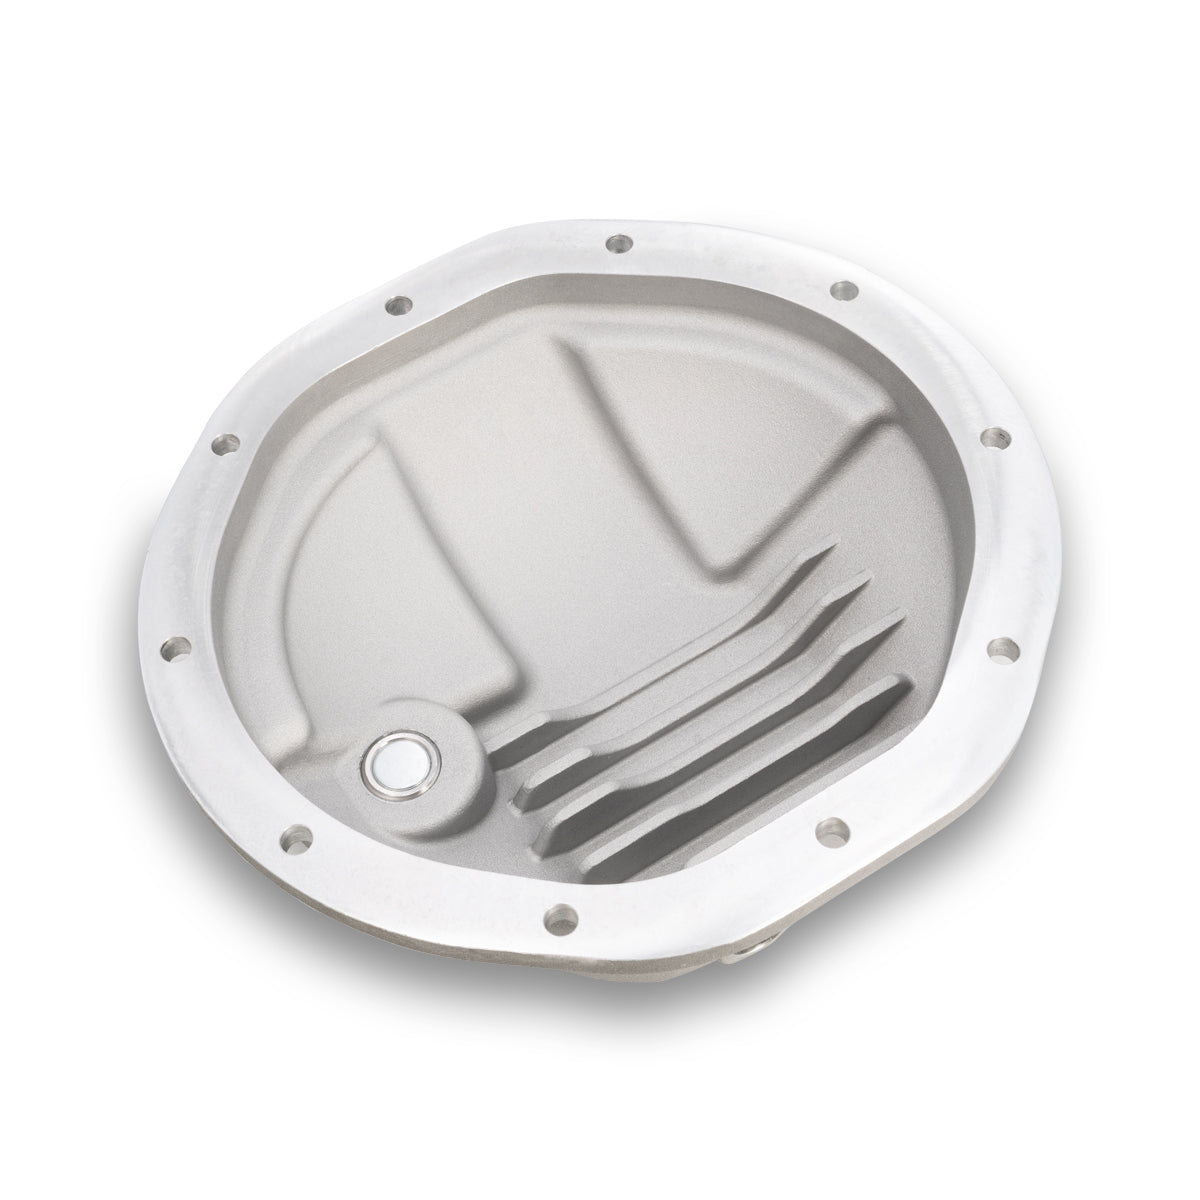 PPE Diesel 1972-2013 GM K1500 8.5 Inch -10 Heavy-Duty Aluminum Rear Differential Cover Raw 138051300